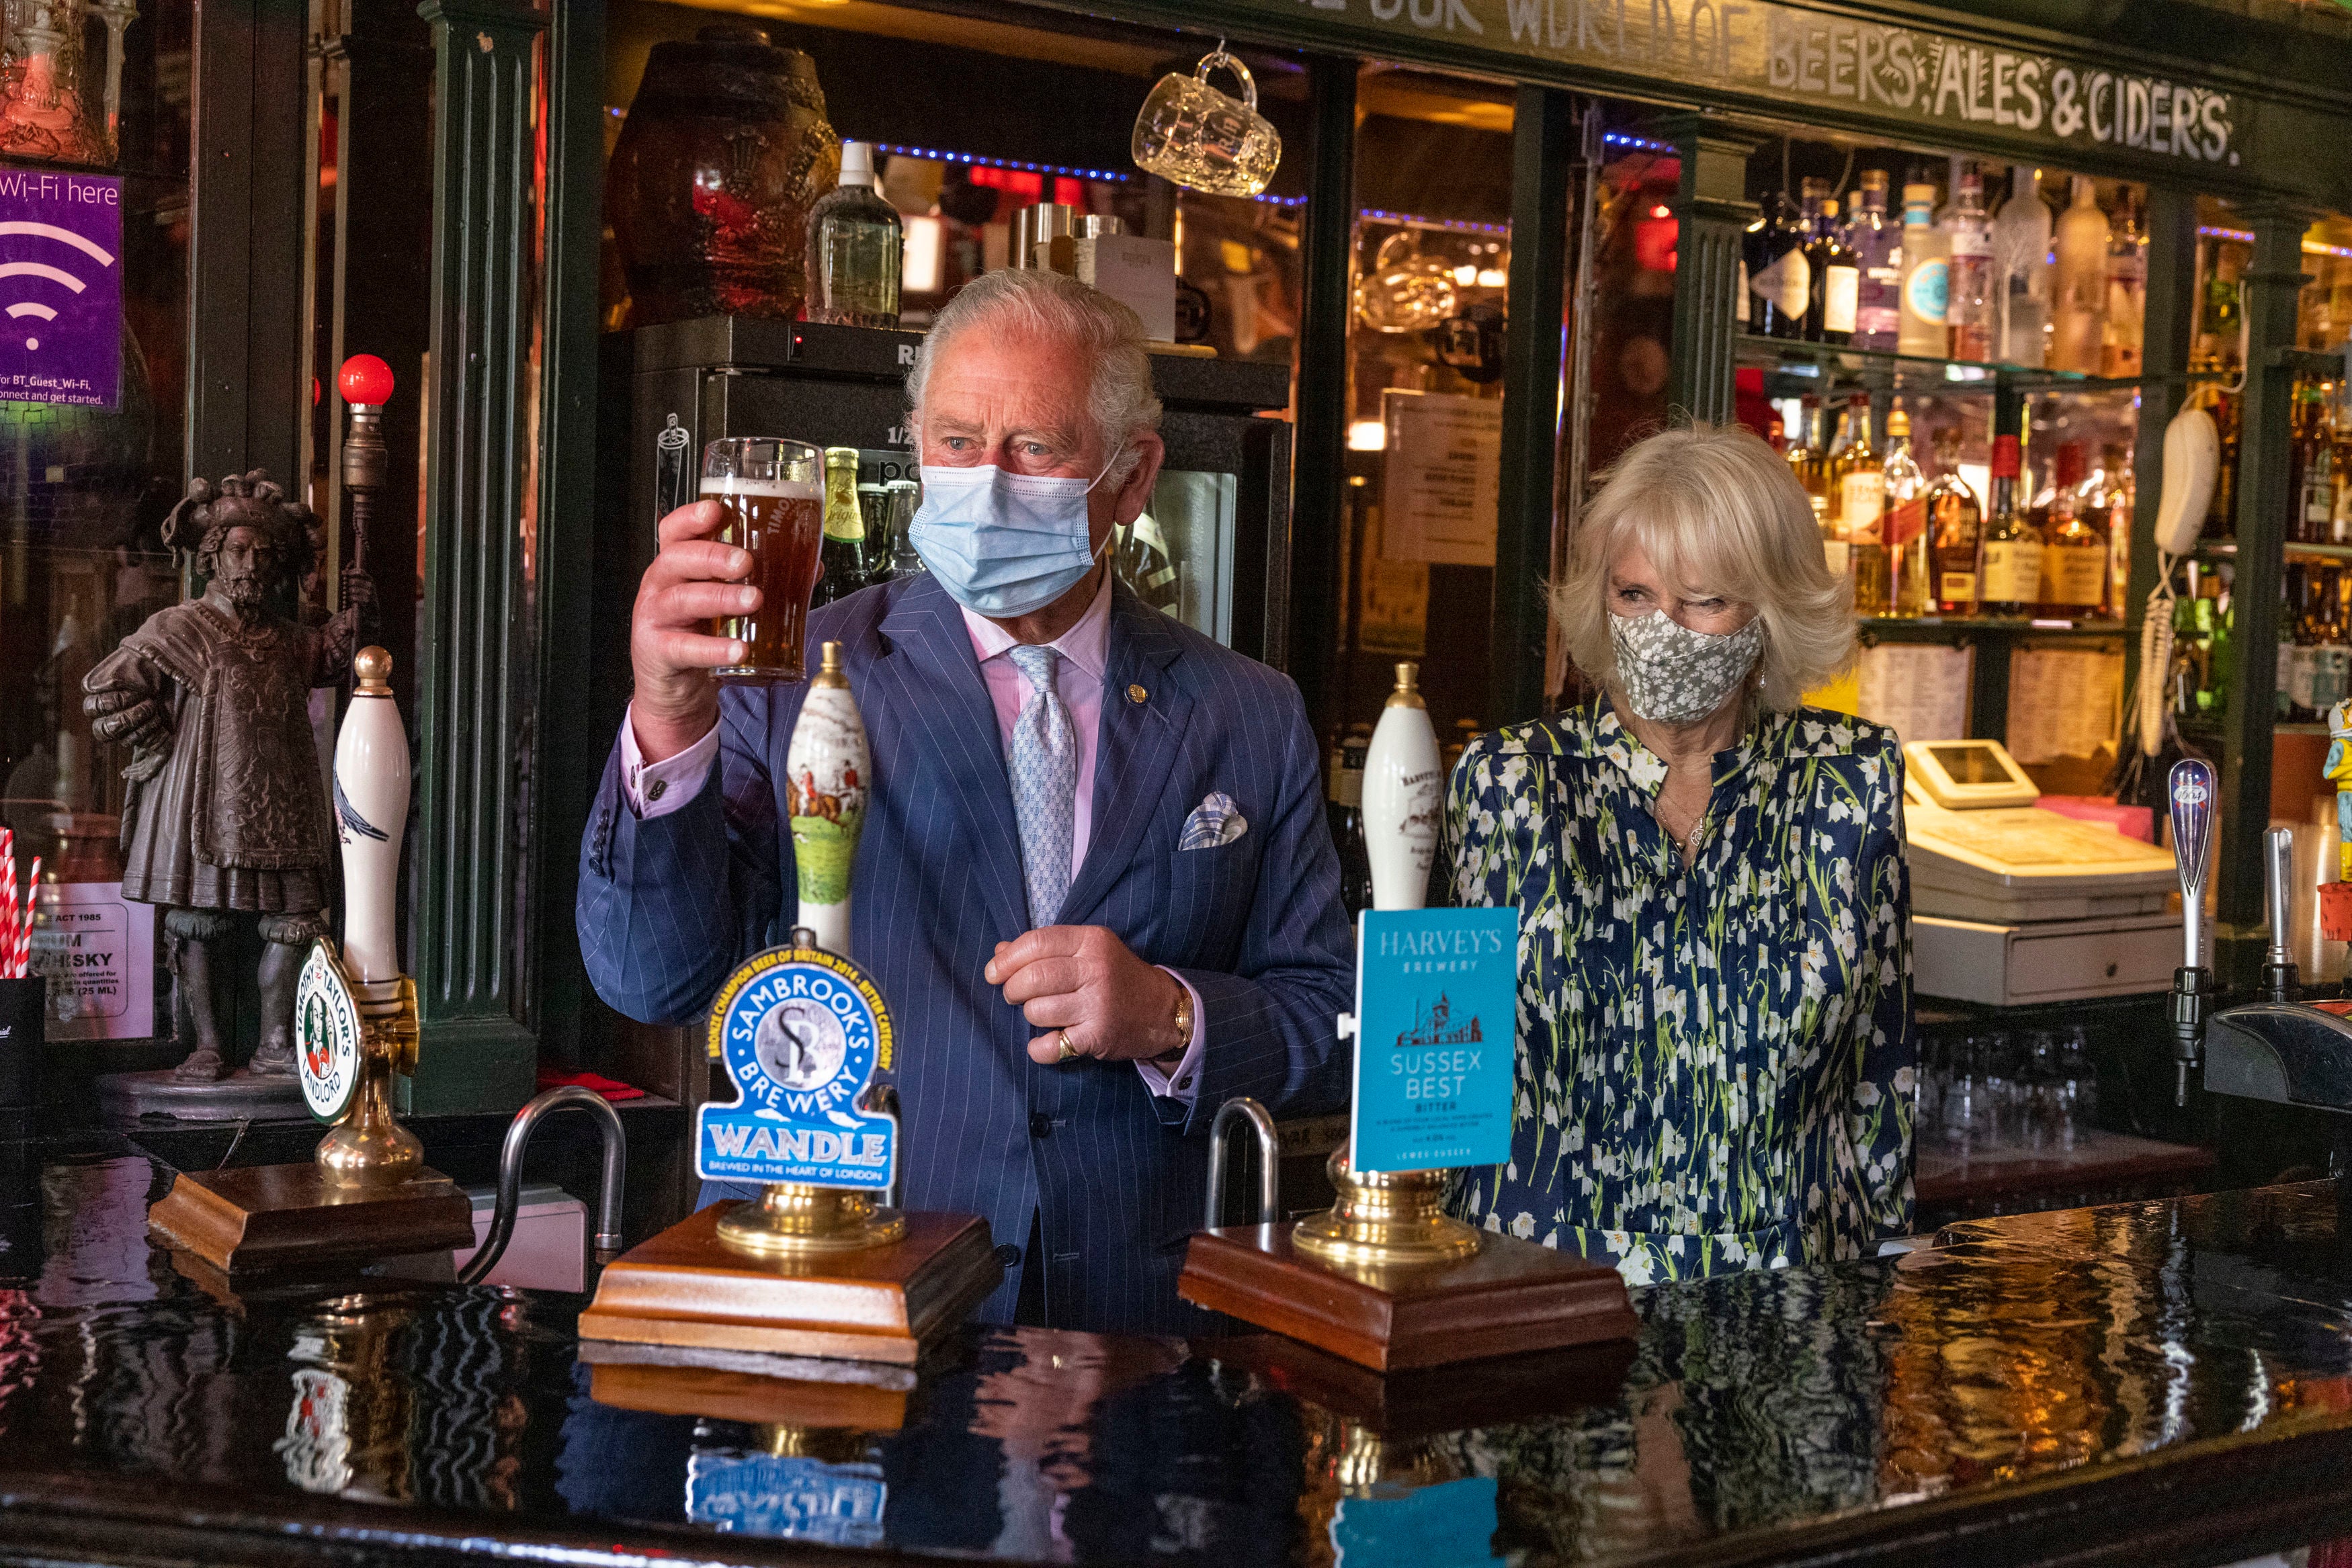 Charles and Camilla stand behind the bar after the former prince pulled a pint, during a visit to Clapham Old Town, to celebrate the reopening of non-essential shops as Covid coronavirus restrictions were eased